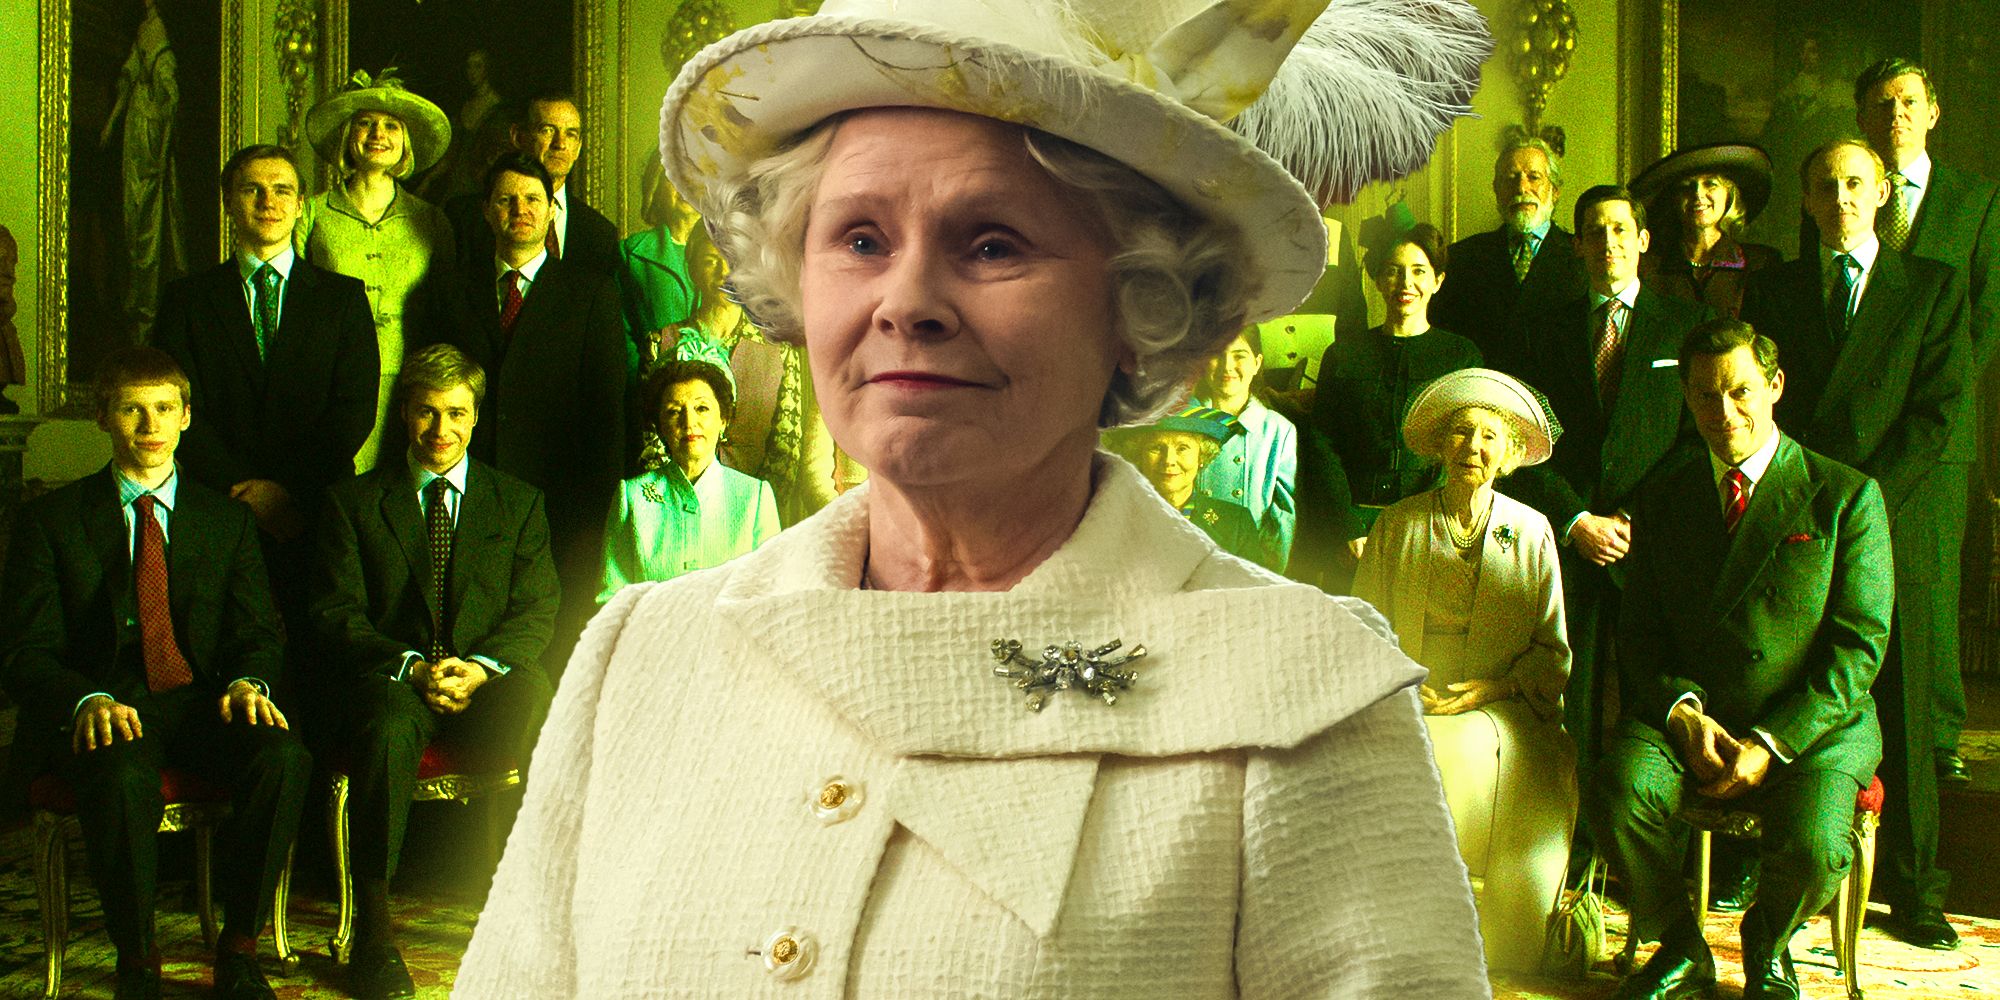 Imelda Staunton as Queen Elizabeth II in the center with The Crown season 6 part 2's royal family in the background